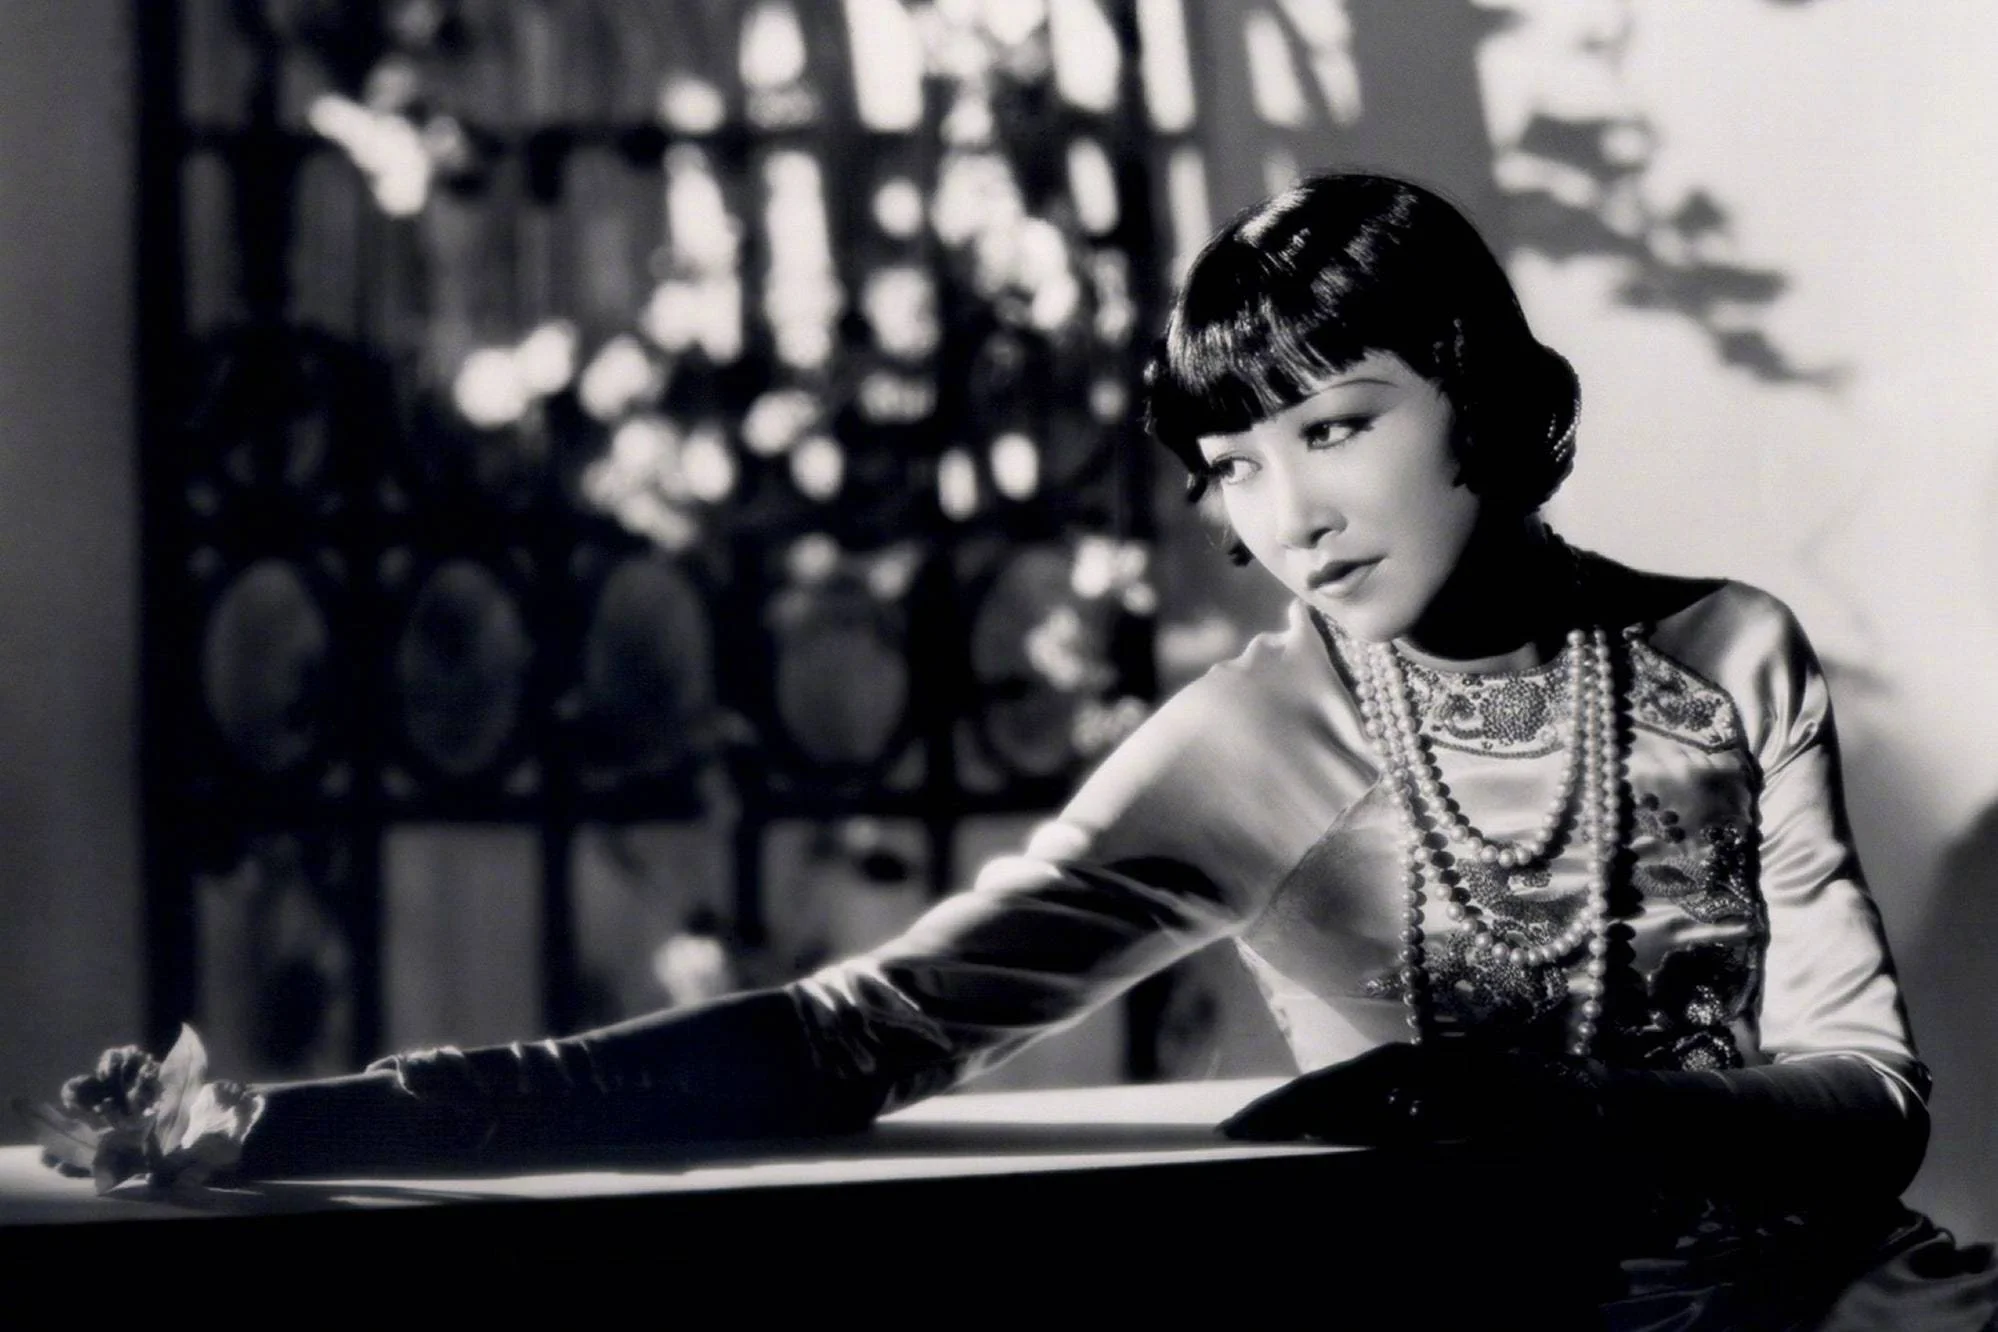 Gemma Chan will star in Anna May Wong biopic